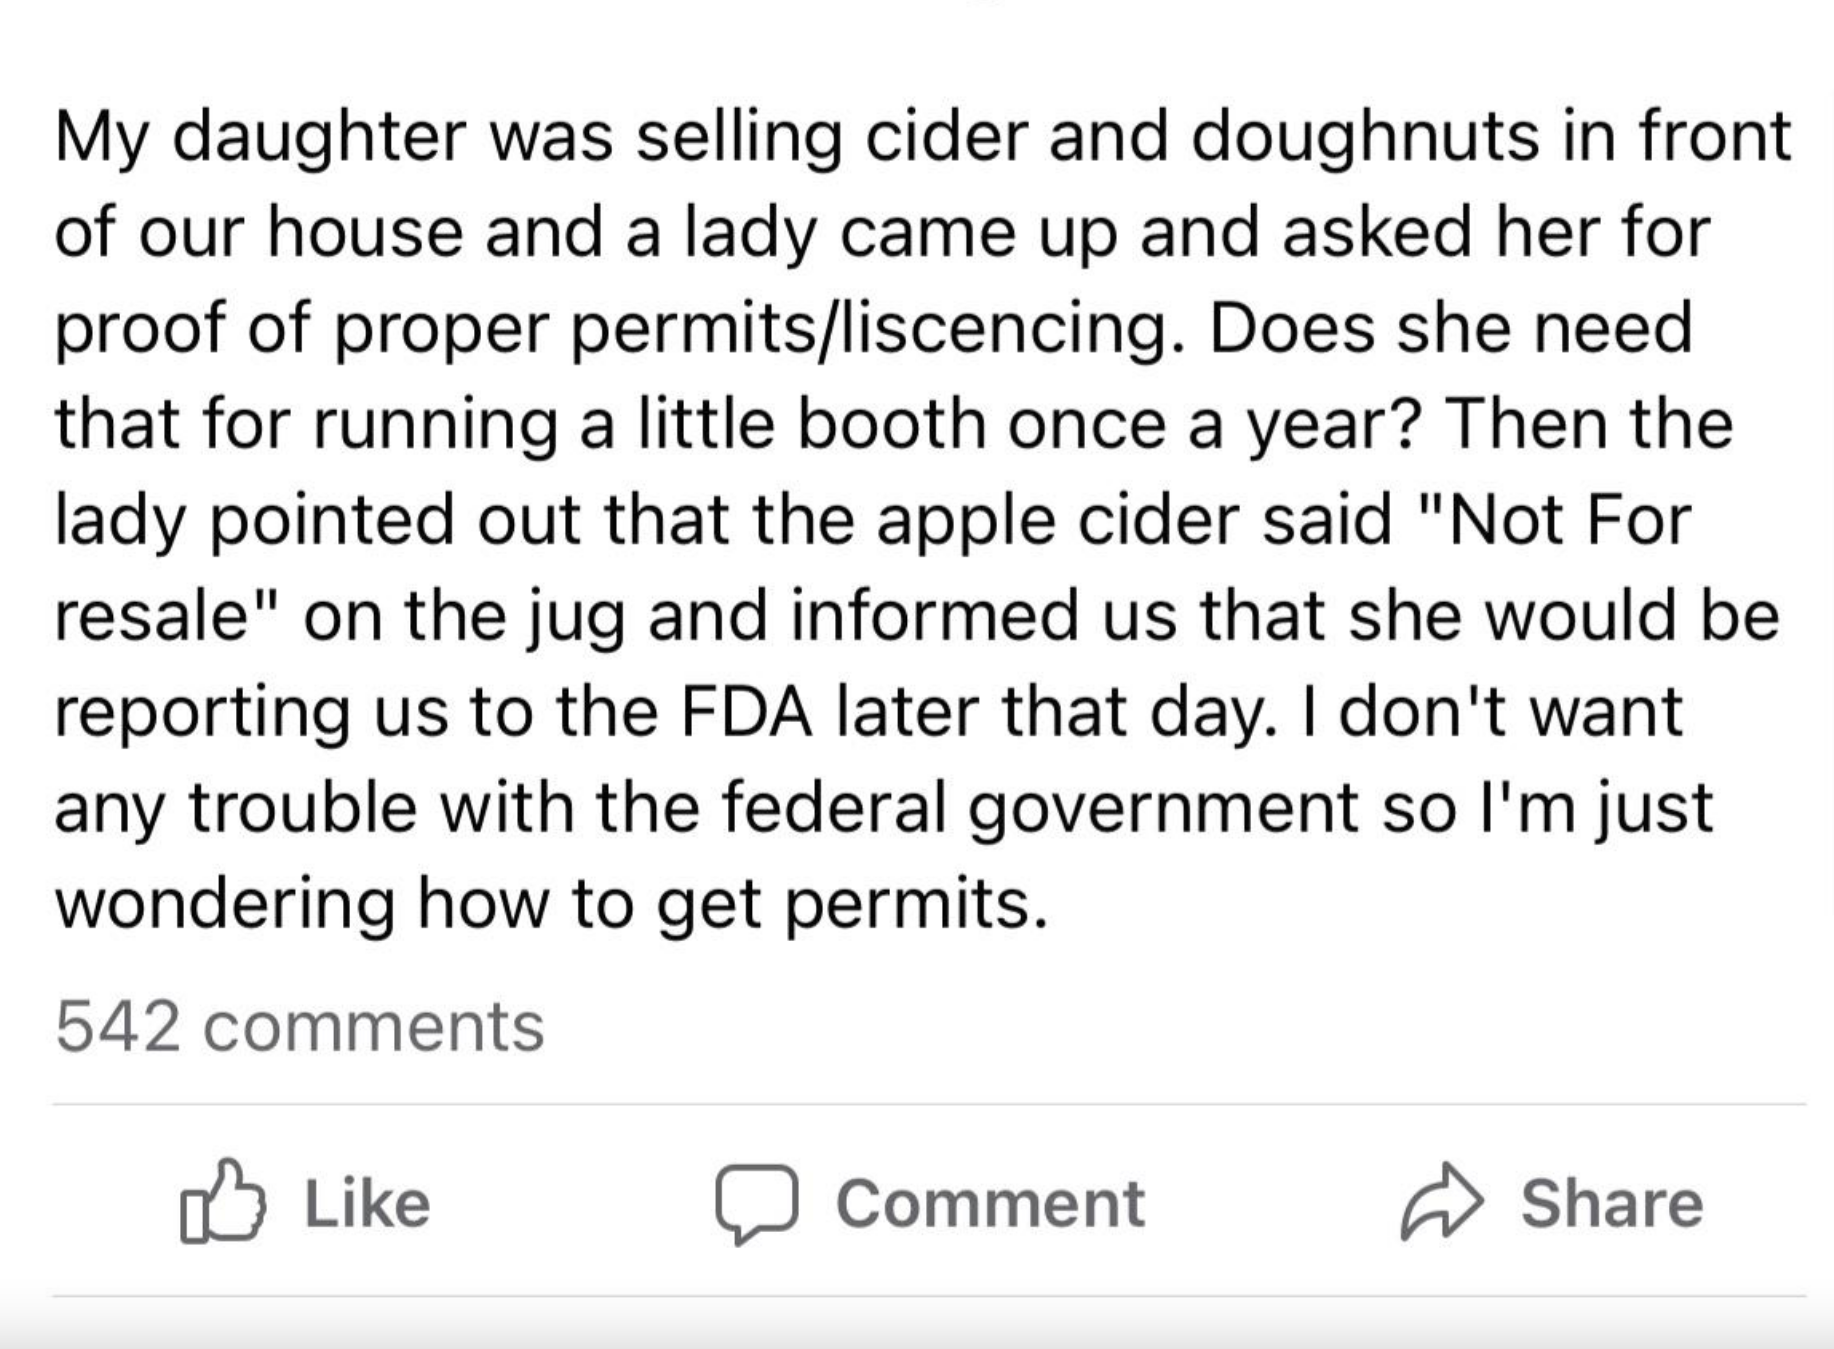 A young girl has a curbside booth where she sells cider and donuts, and a woman asked the girl for proof of permits and said she would report her to the FDA for selling cider that says not for resale on it